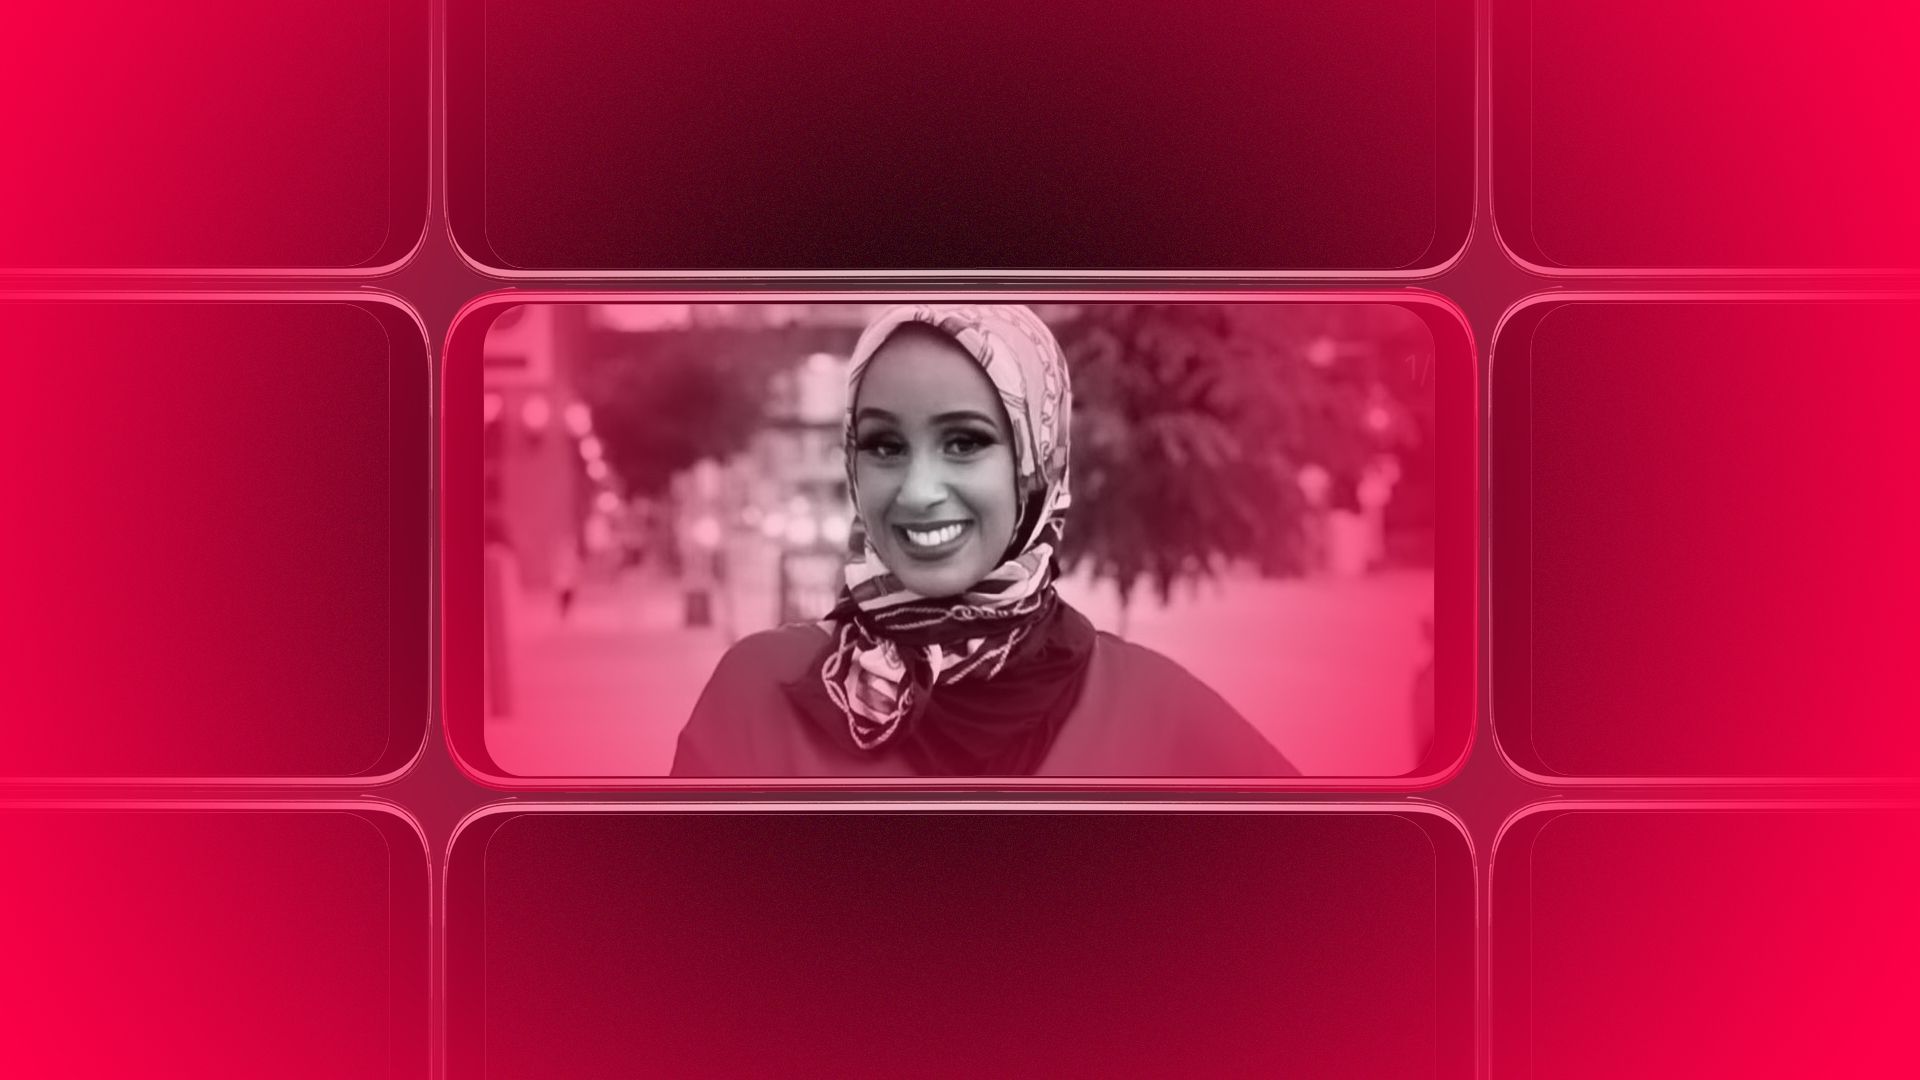 Photo illustration of a grid of smartphone screens, the center one showing Mariam Mohamed.